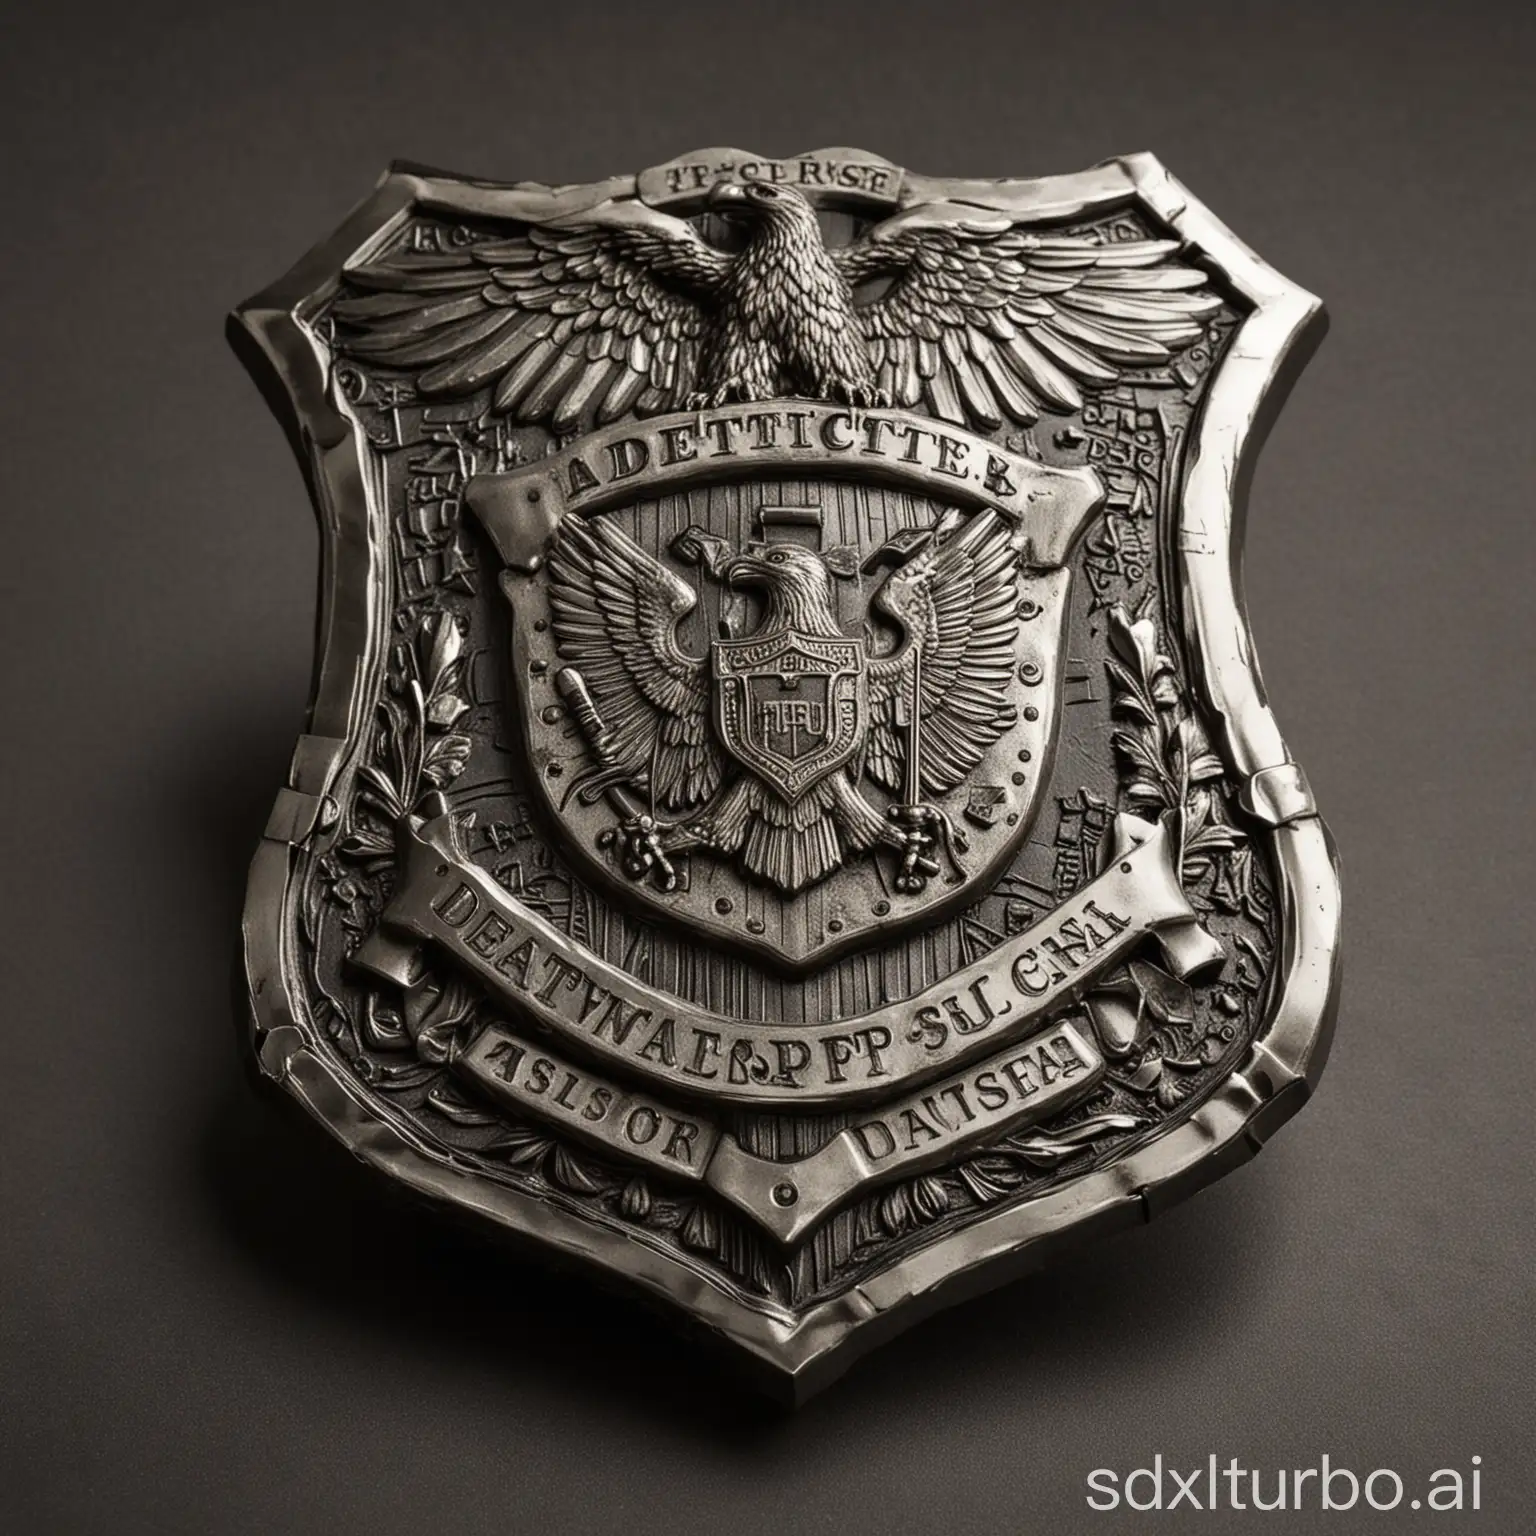 A high-definition detective's badge made of polished metal with intricate engravings. The badge is shield-shaped, featuring an emblem at the center such as a star or an eagle. The word "Detective" is prominently displayed along with a unique badge number and the department name. The metal surface is shiny and reflective, highlighting its polished finish. The background is simple and dark, making the details of the badge stand out. The style is realistic and detailed, emphasizing the craftsmanship and authority of the badge. Key elements: detective's badge, polished metal, shield shape, emblem, word "Detective", badge number, department name, shiny surface, realistic and detailed style, dark background.
